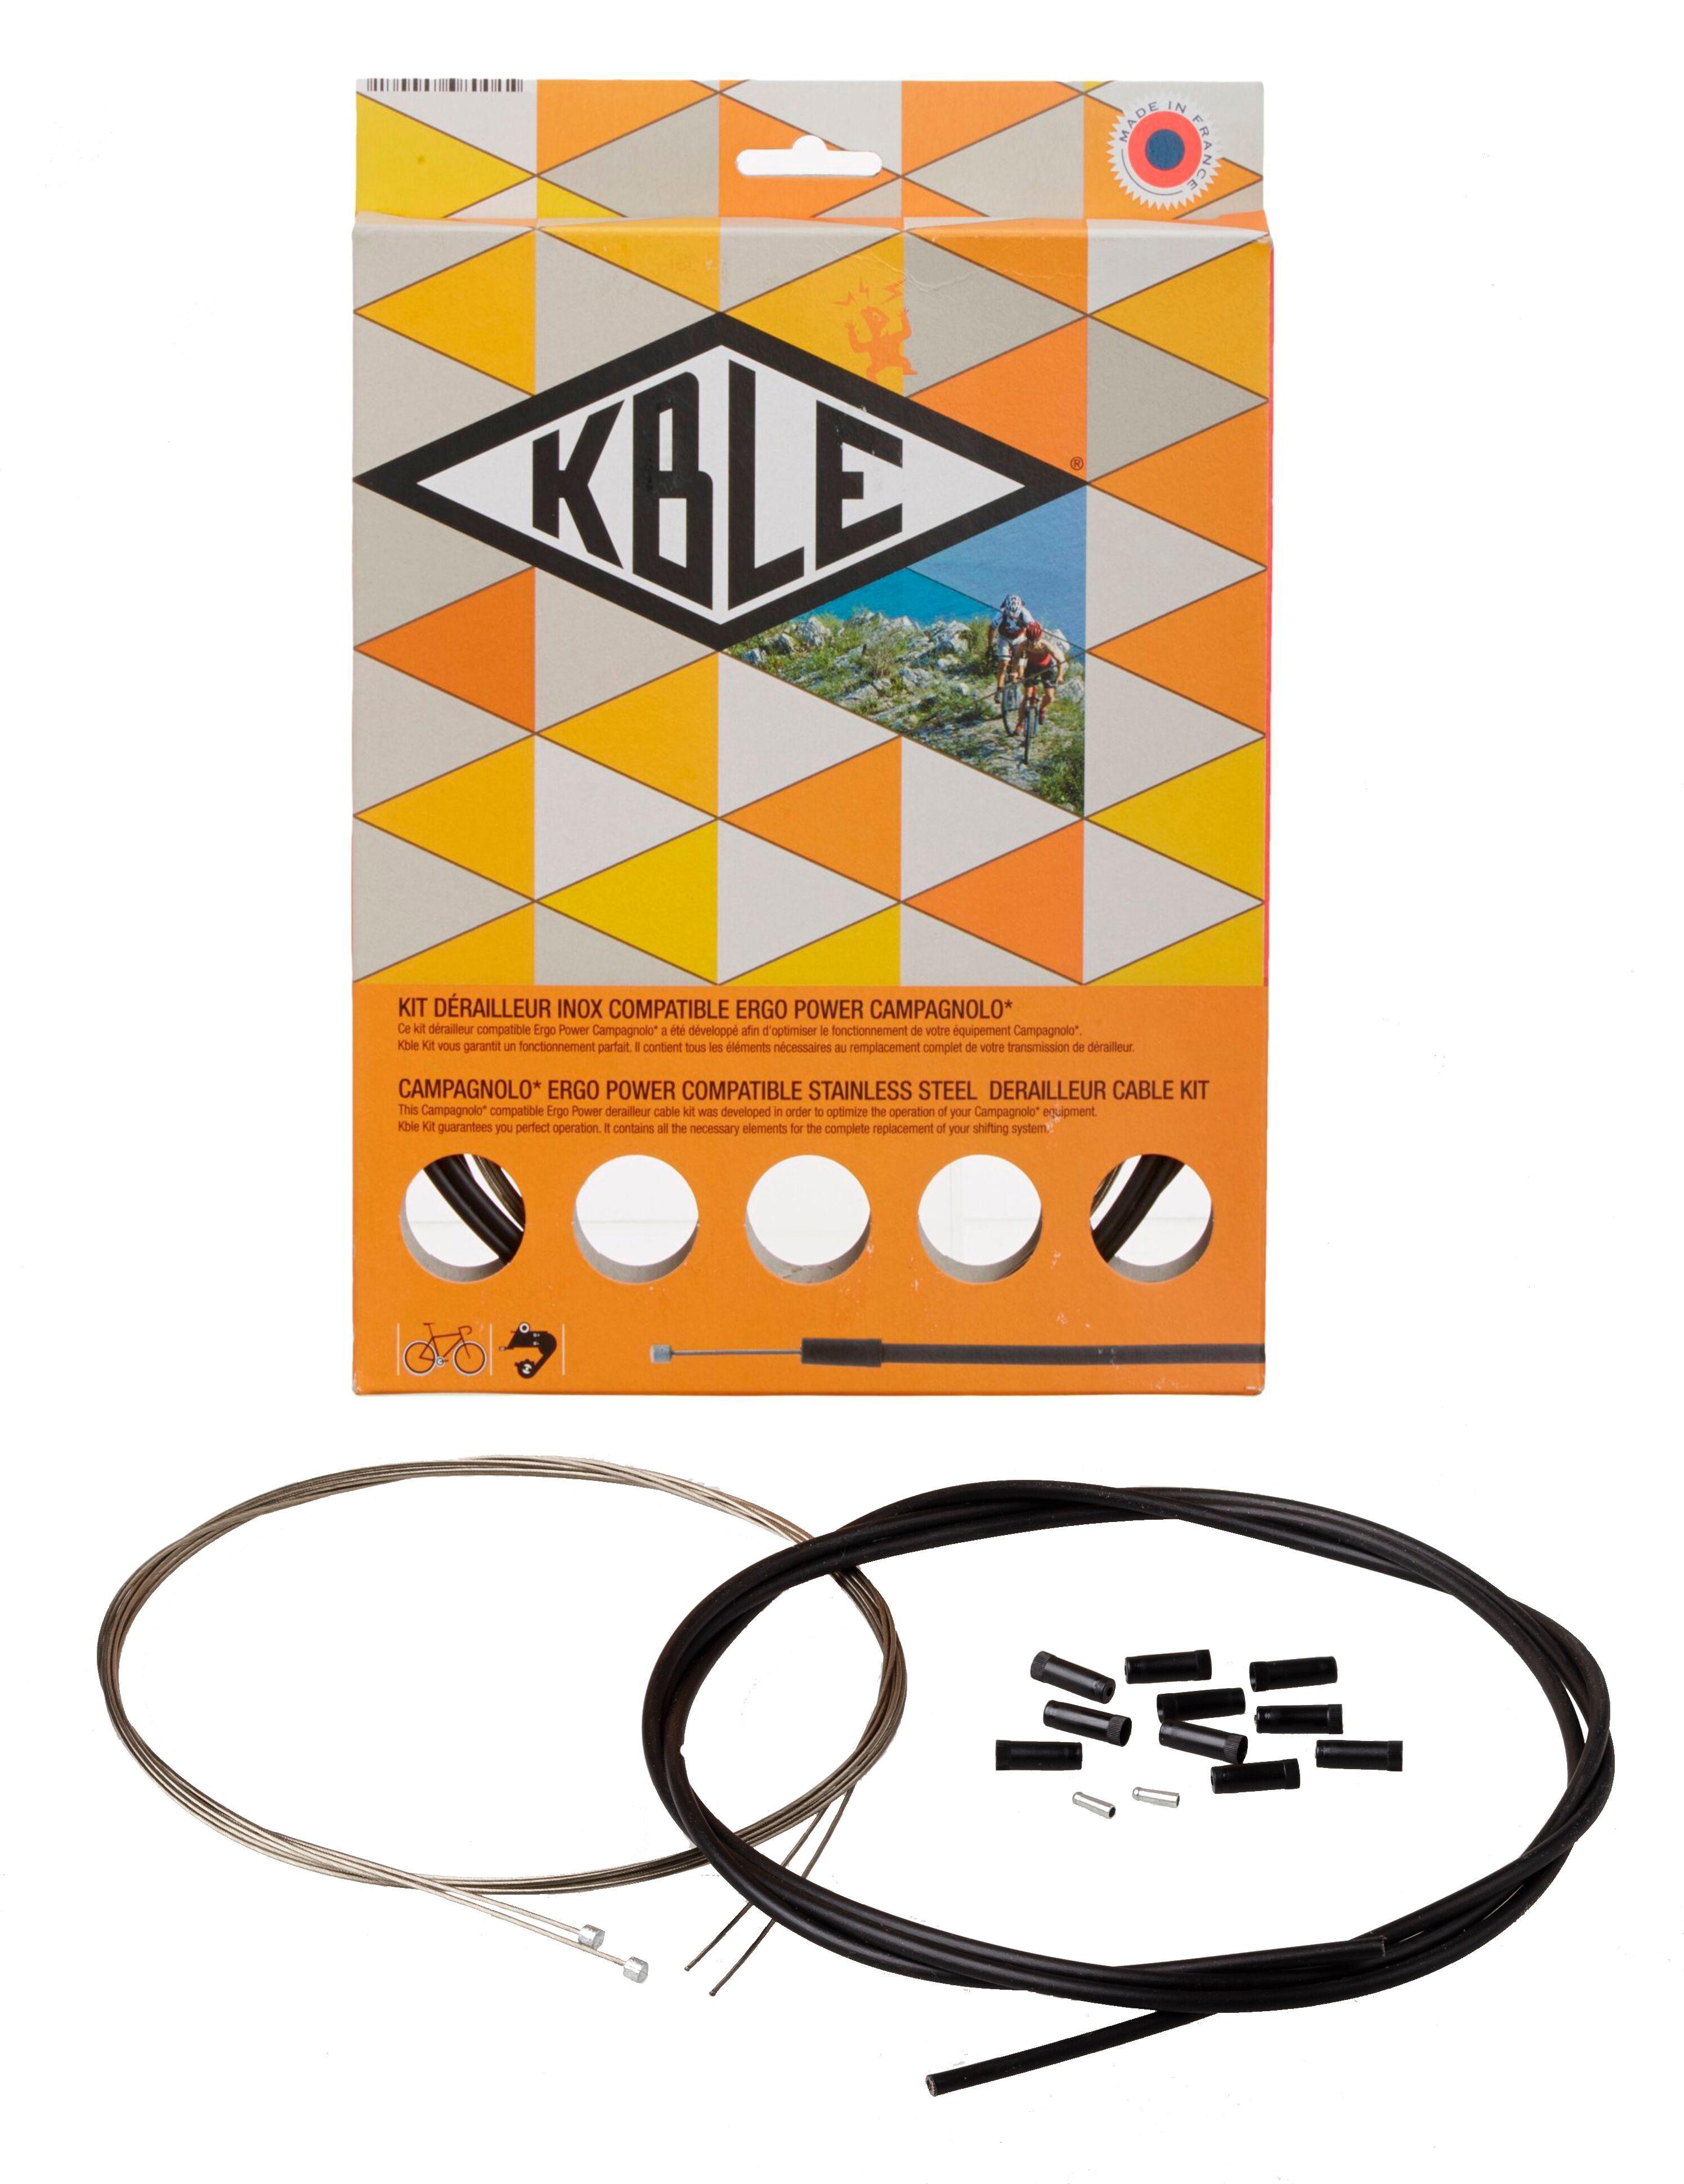 Transfil K.ble Campagnolo Gear Cable Set - Black